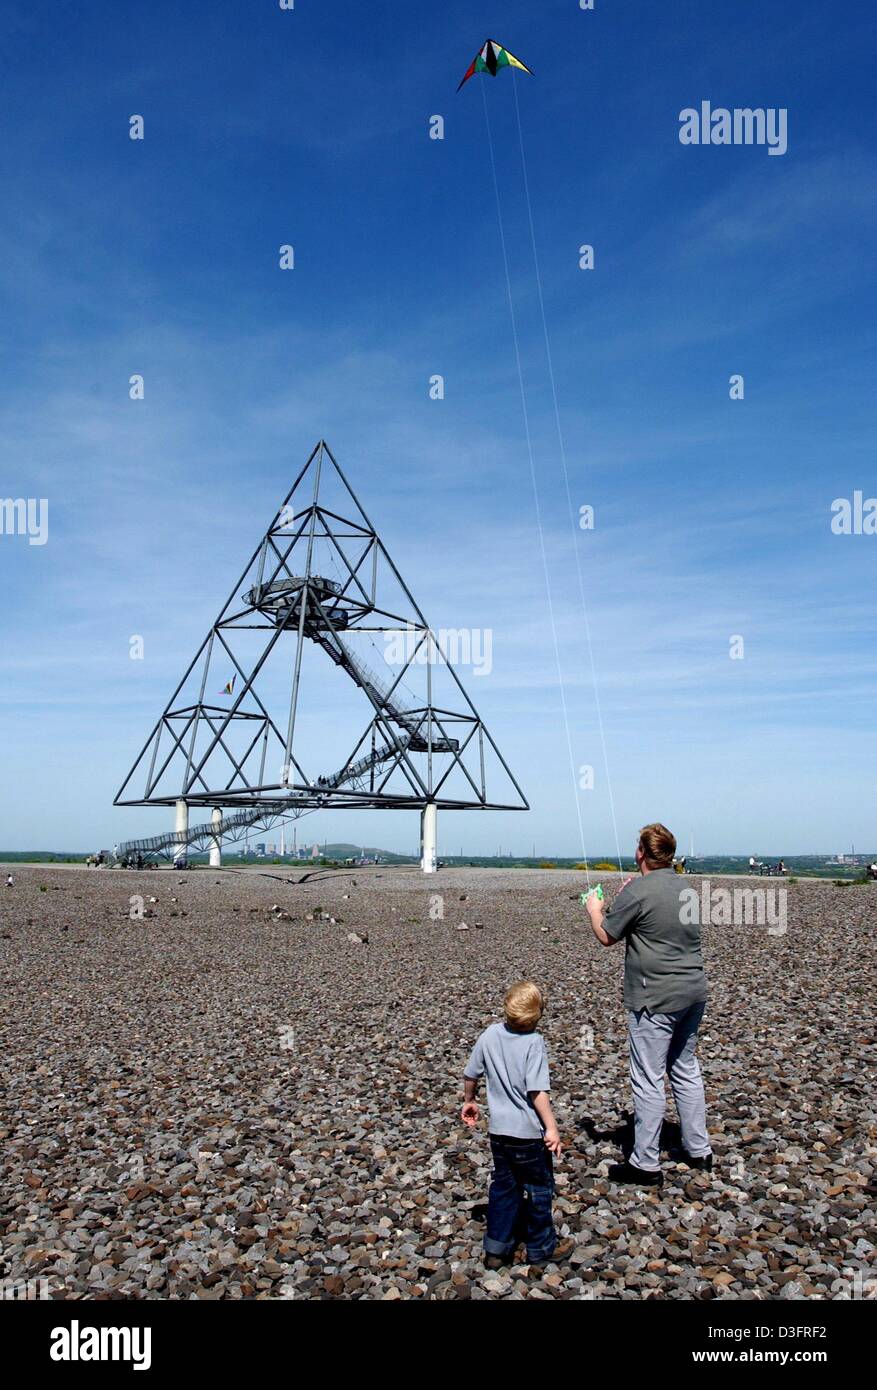 (dpa) - A father and his son fly a kite in front of the Tetraeder on the stone heap in Bottrop, Germany, 3 May 2003. The Tetraeder is a work of art which was built in the context of the international construction exhibition in 1994. It weighs 230 tons and is about 165 metres in height. Locals call the heap also 'Monte Schlacko' and use it as a favourite lookout point. Stock Photo